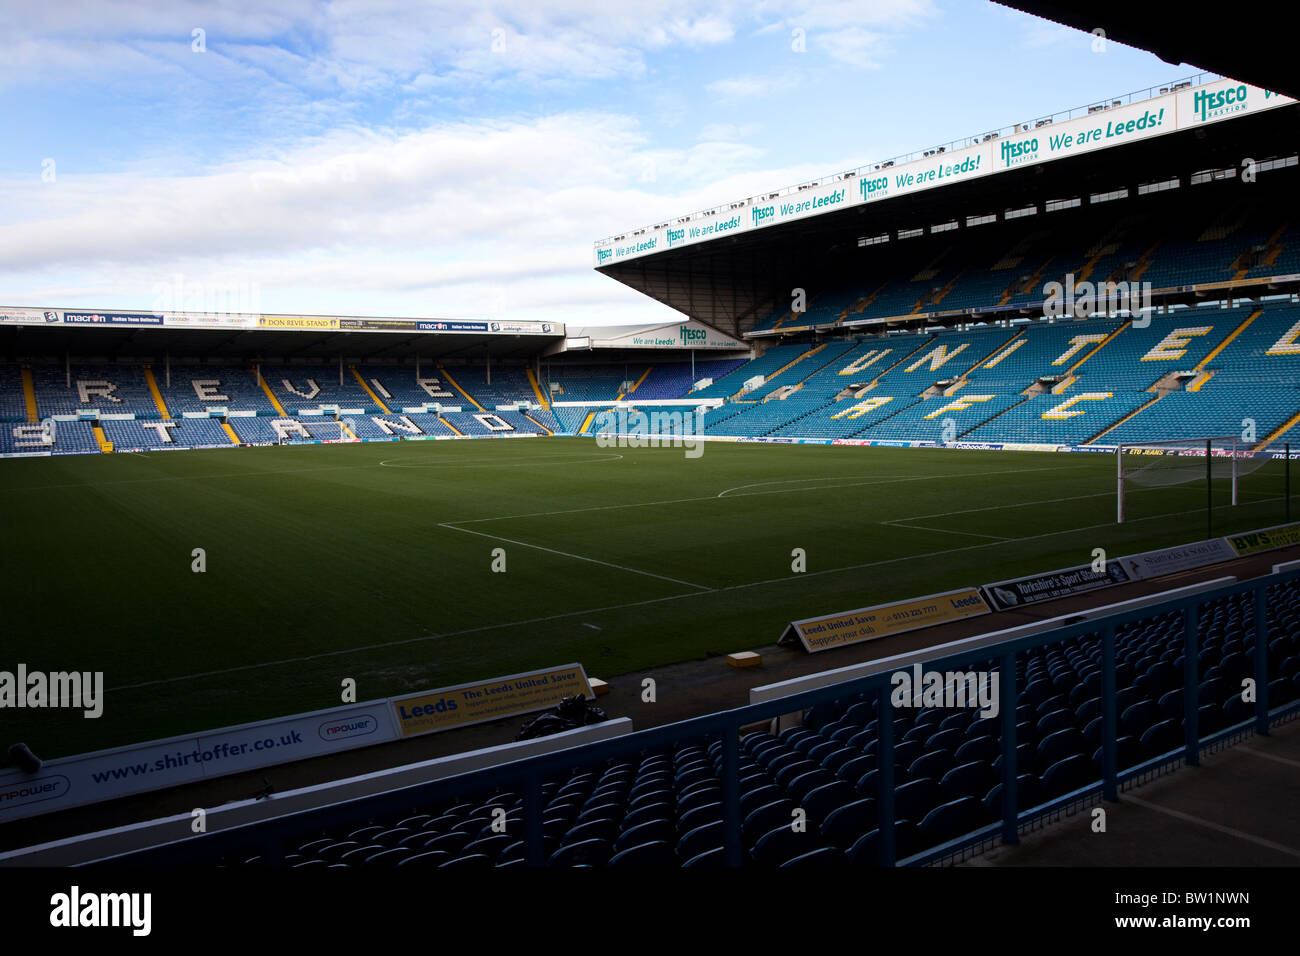 The East Stand at Leeds United's Football Ground Stock Photo